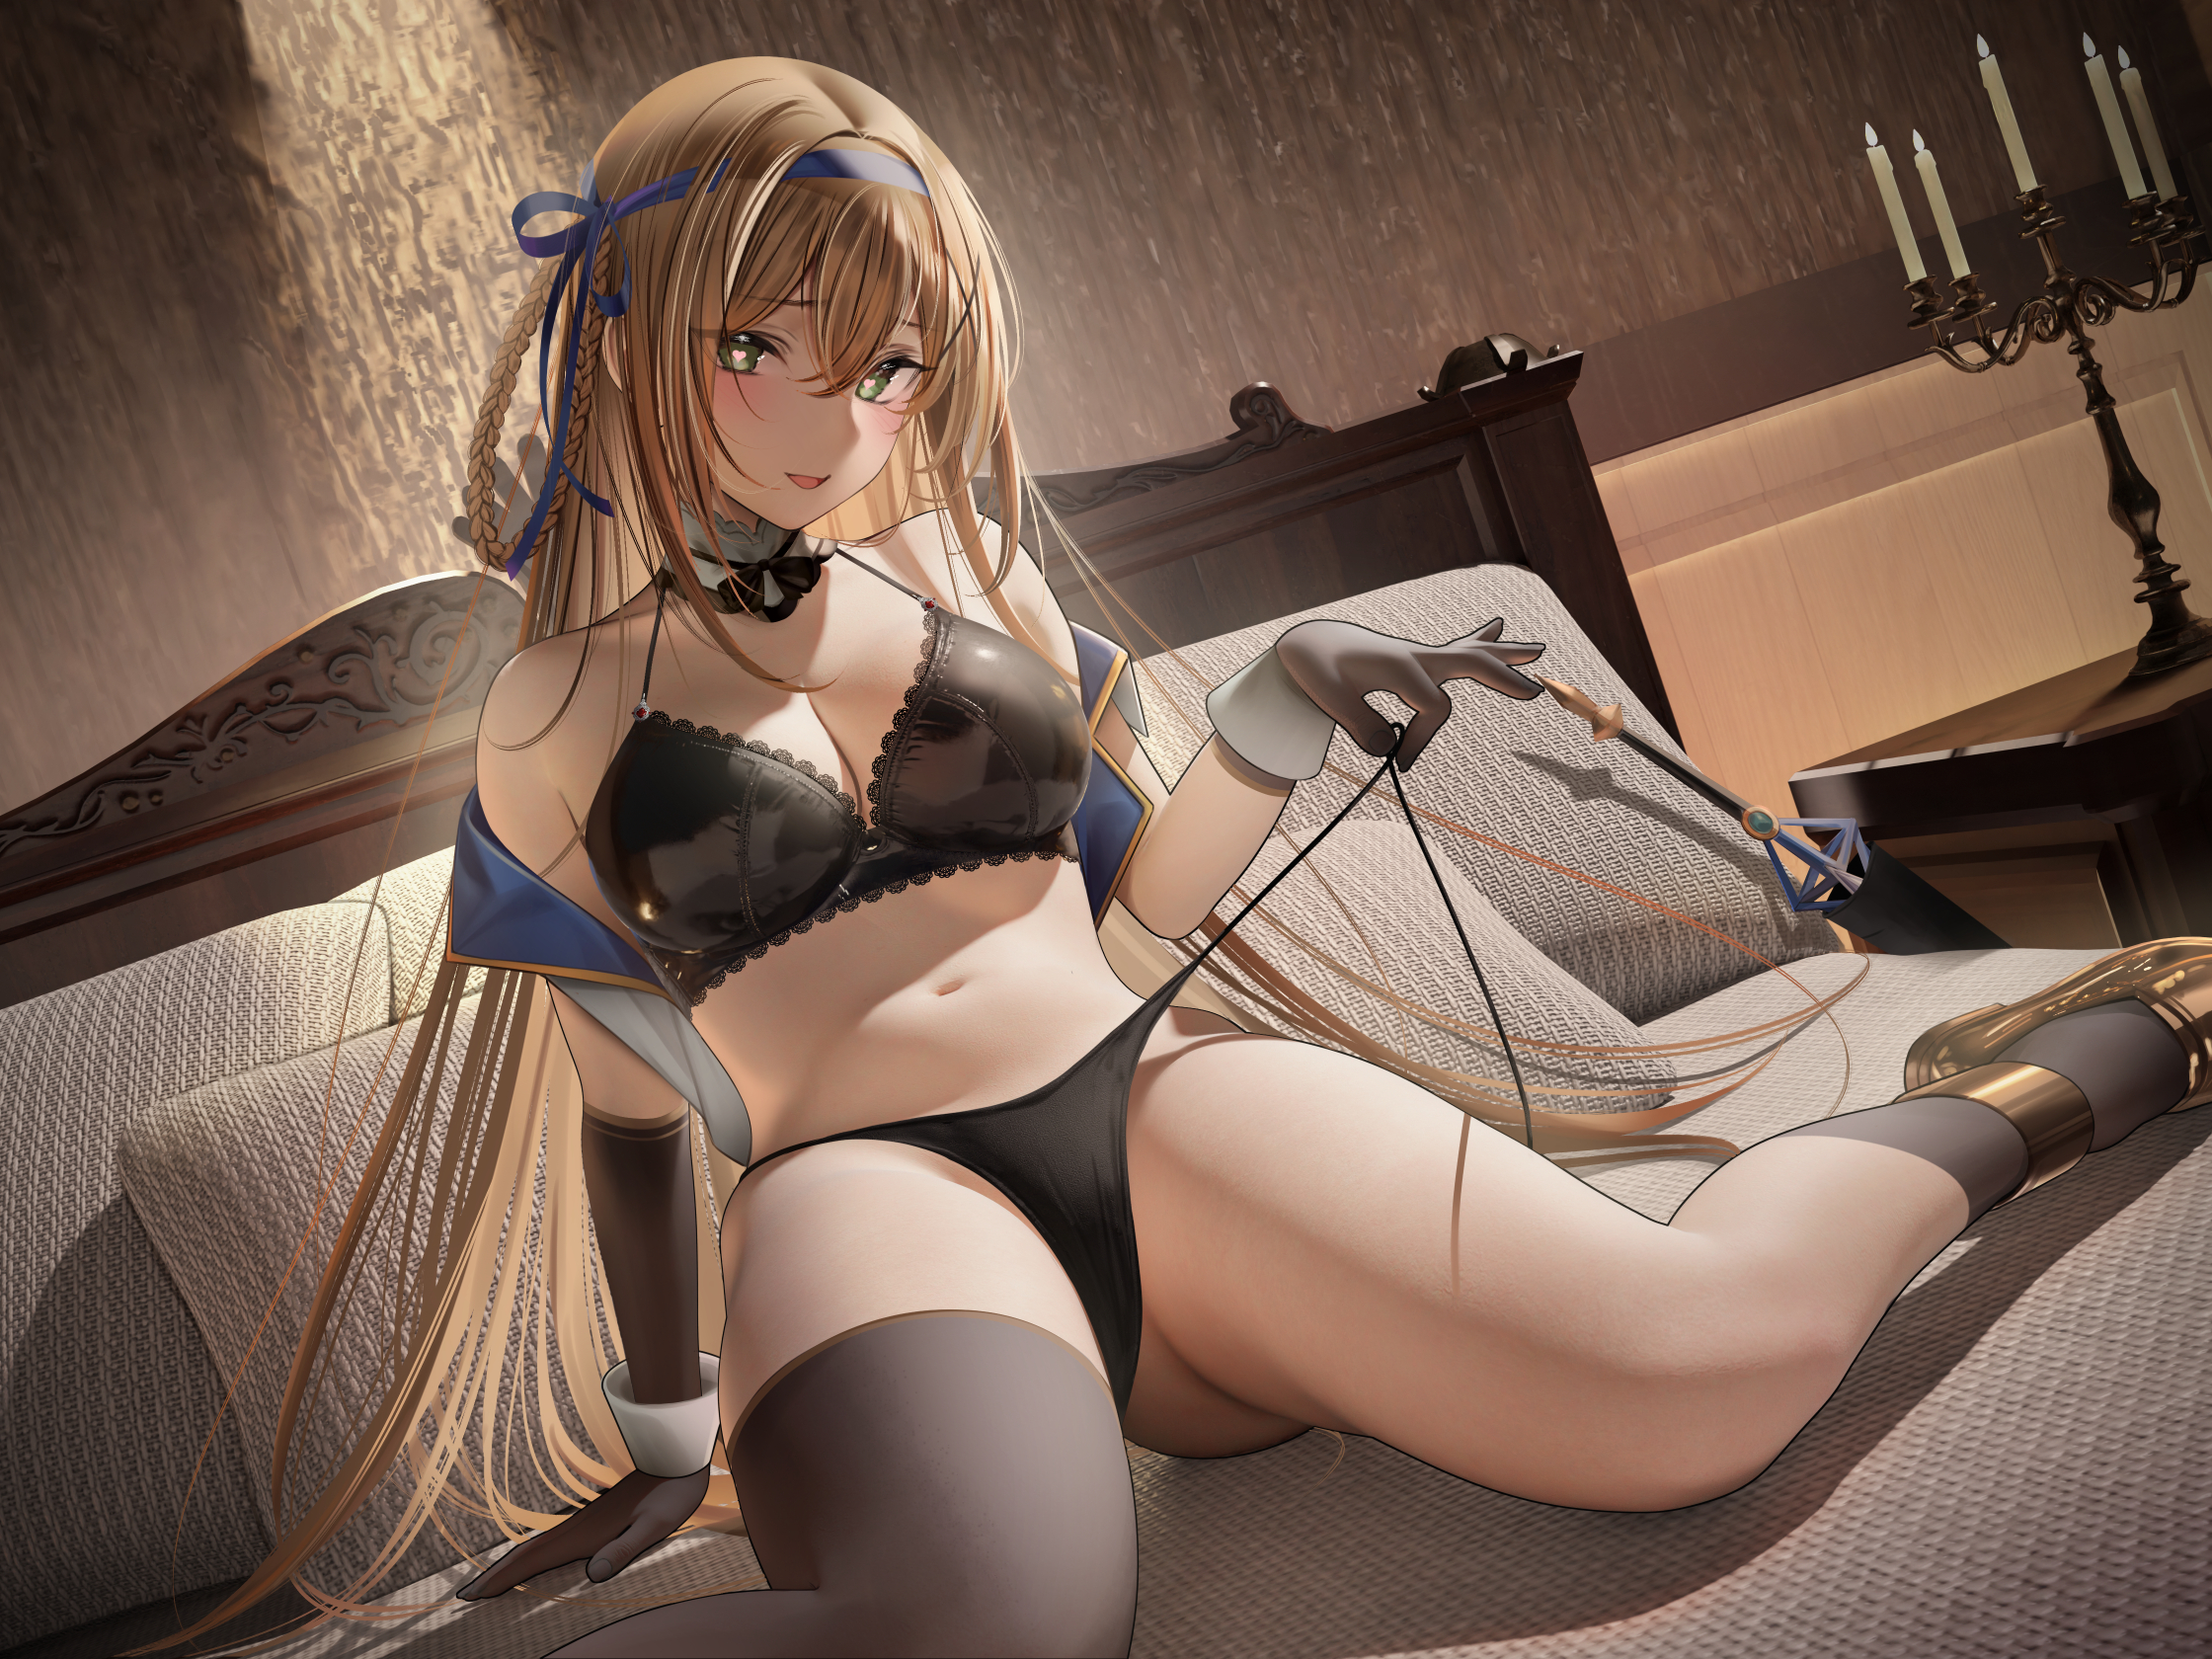 Anime 2240x1680 anime girls blonde bra panties black bras black panties stockings black stockings green eyes heart eyes blushing bangs braids gloves sitting long hair cuffs neck cuff bed pillow pulling panties pulling clothing open clothes lingerie black lingerie elbow gloves wrist cuffs thighs hair ribbon ribbon blue ribbons looking at viewer cleavage candles Arknights Saileach(Arknights)